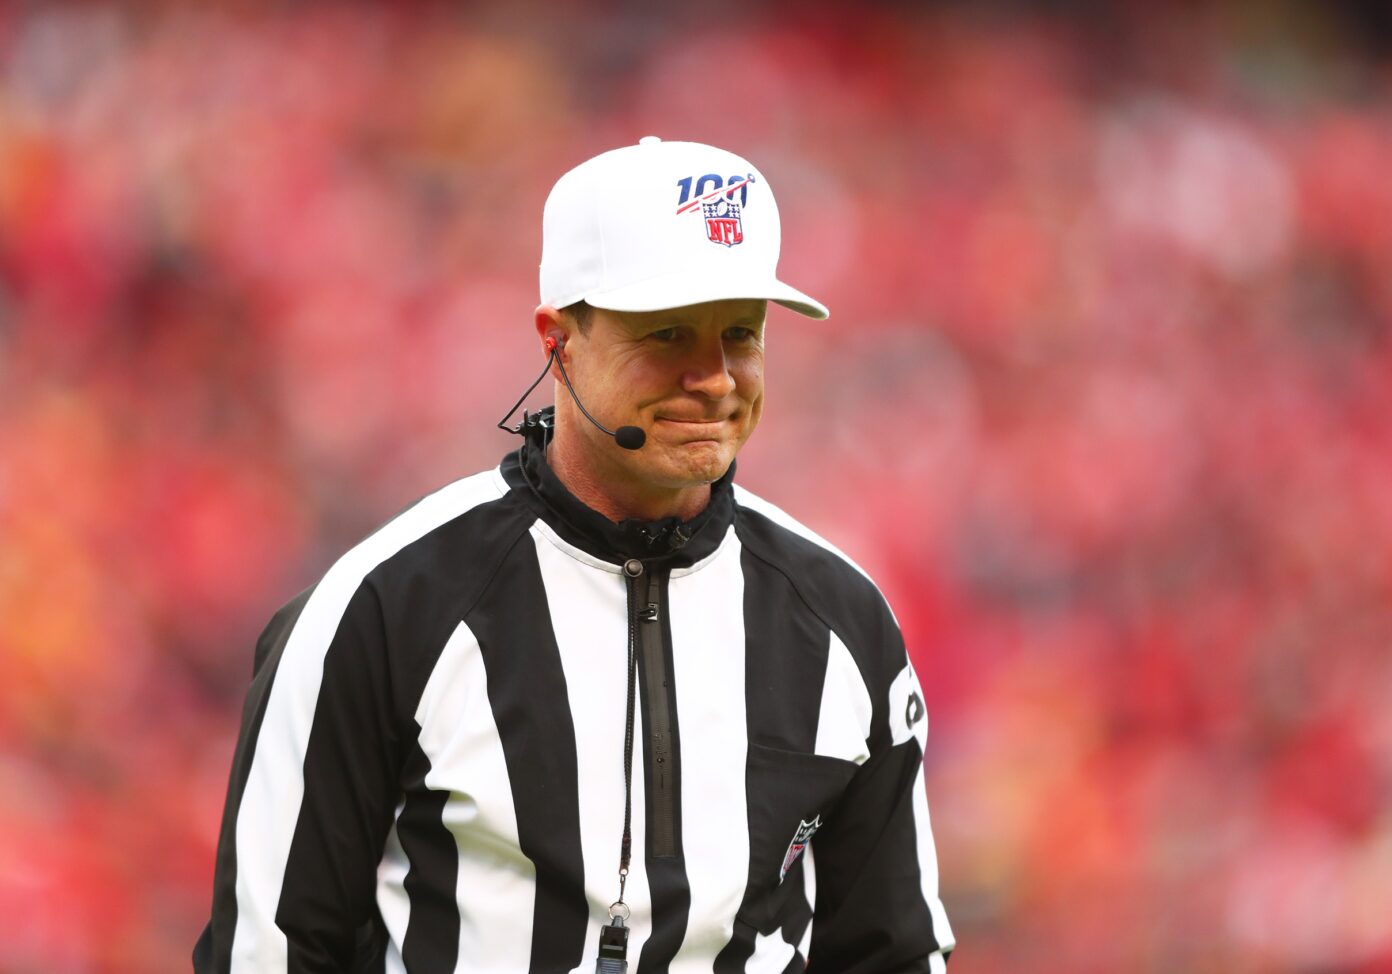 nfl referee assignments for week 7